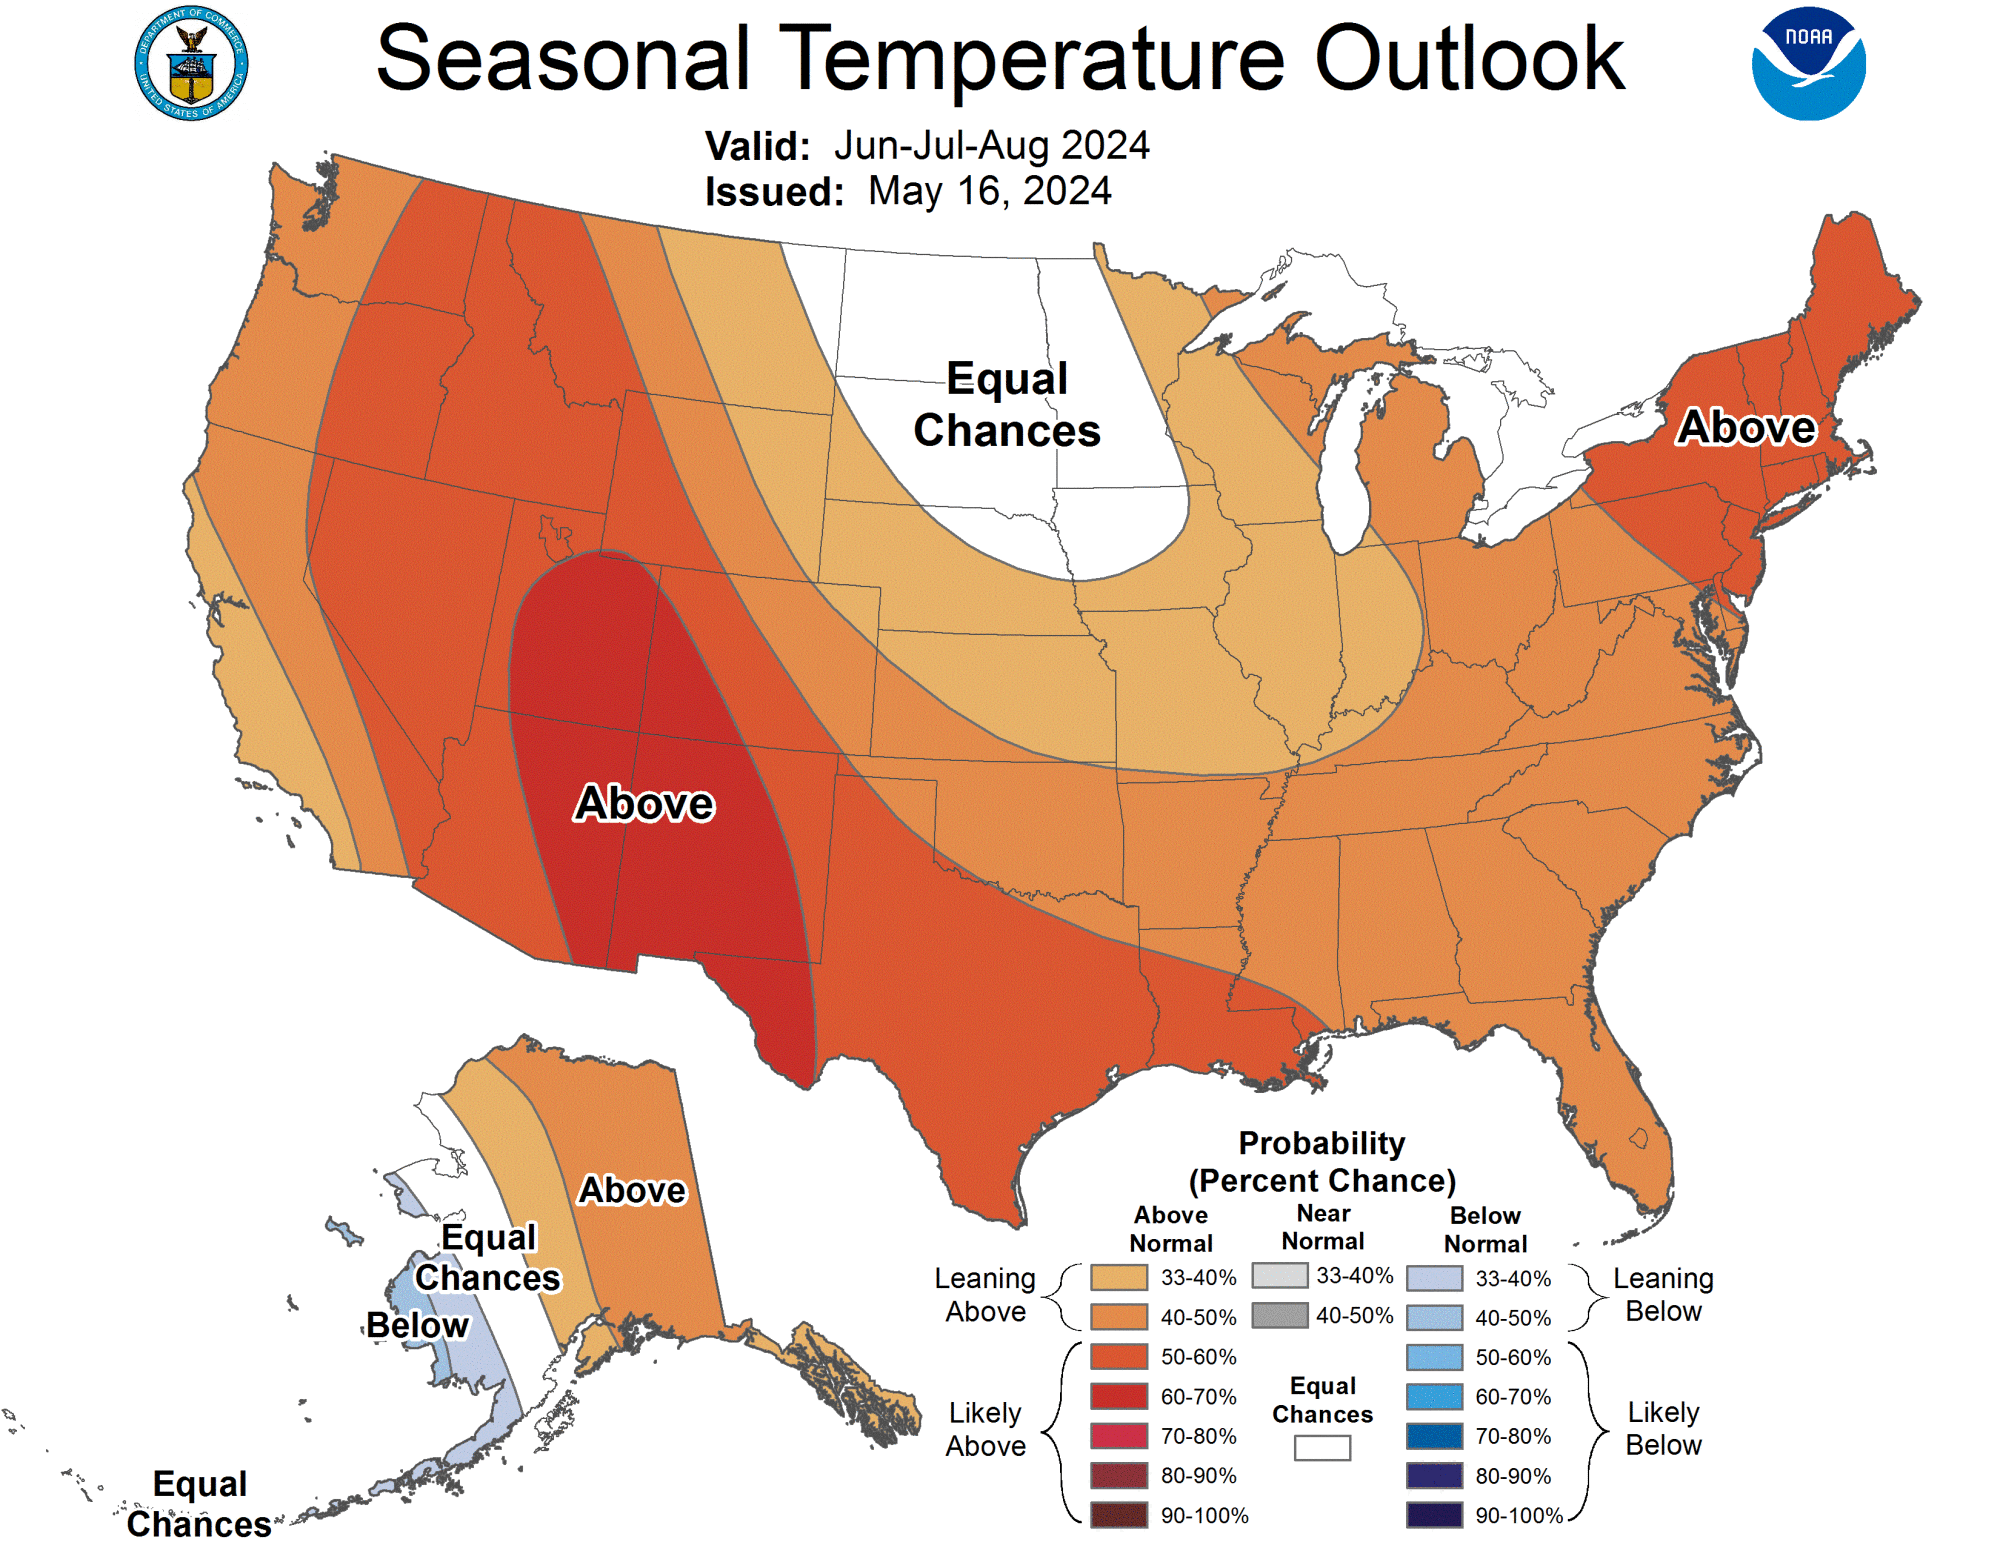 Seasonal outlooks indicate a high probability of warmer than normal temperatures in June, July and August.